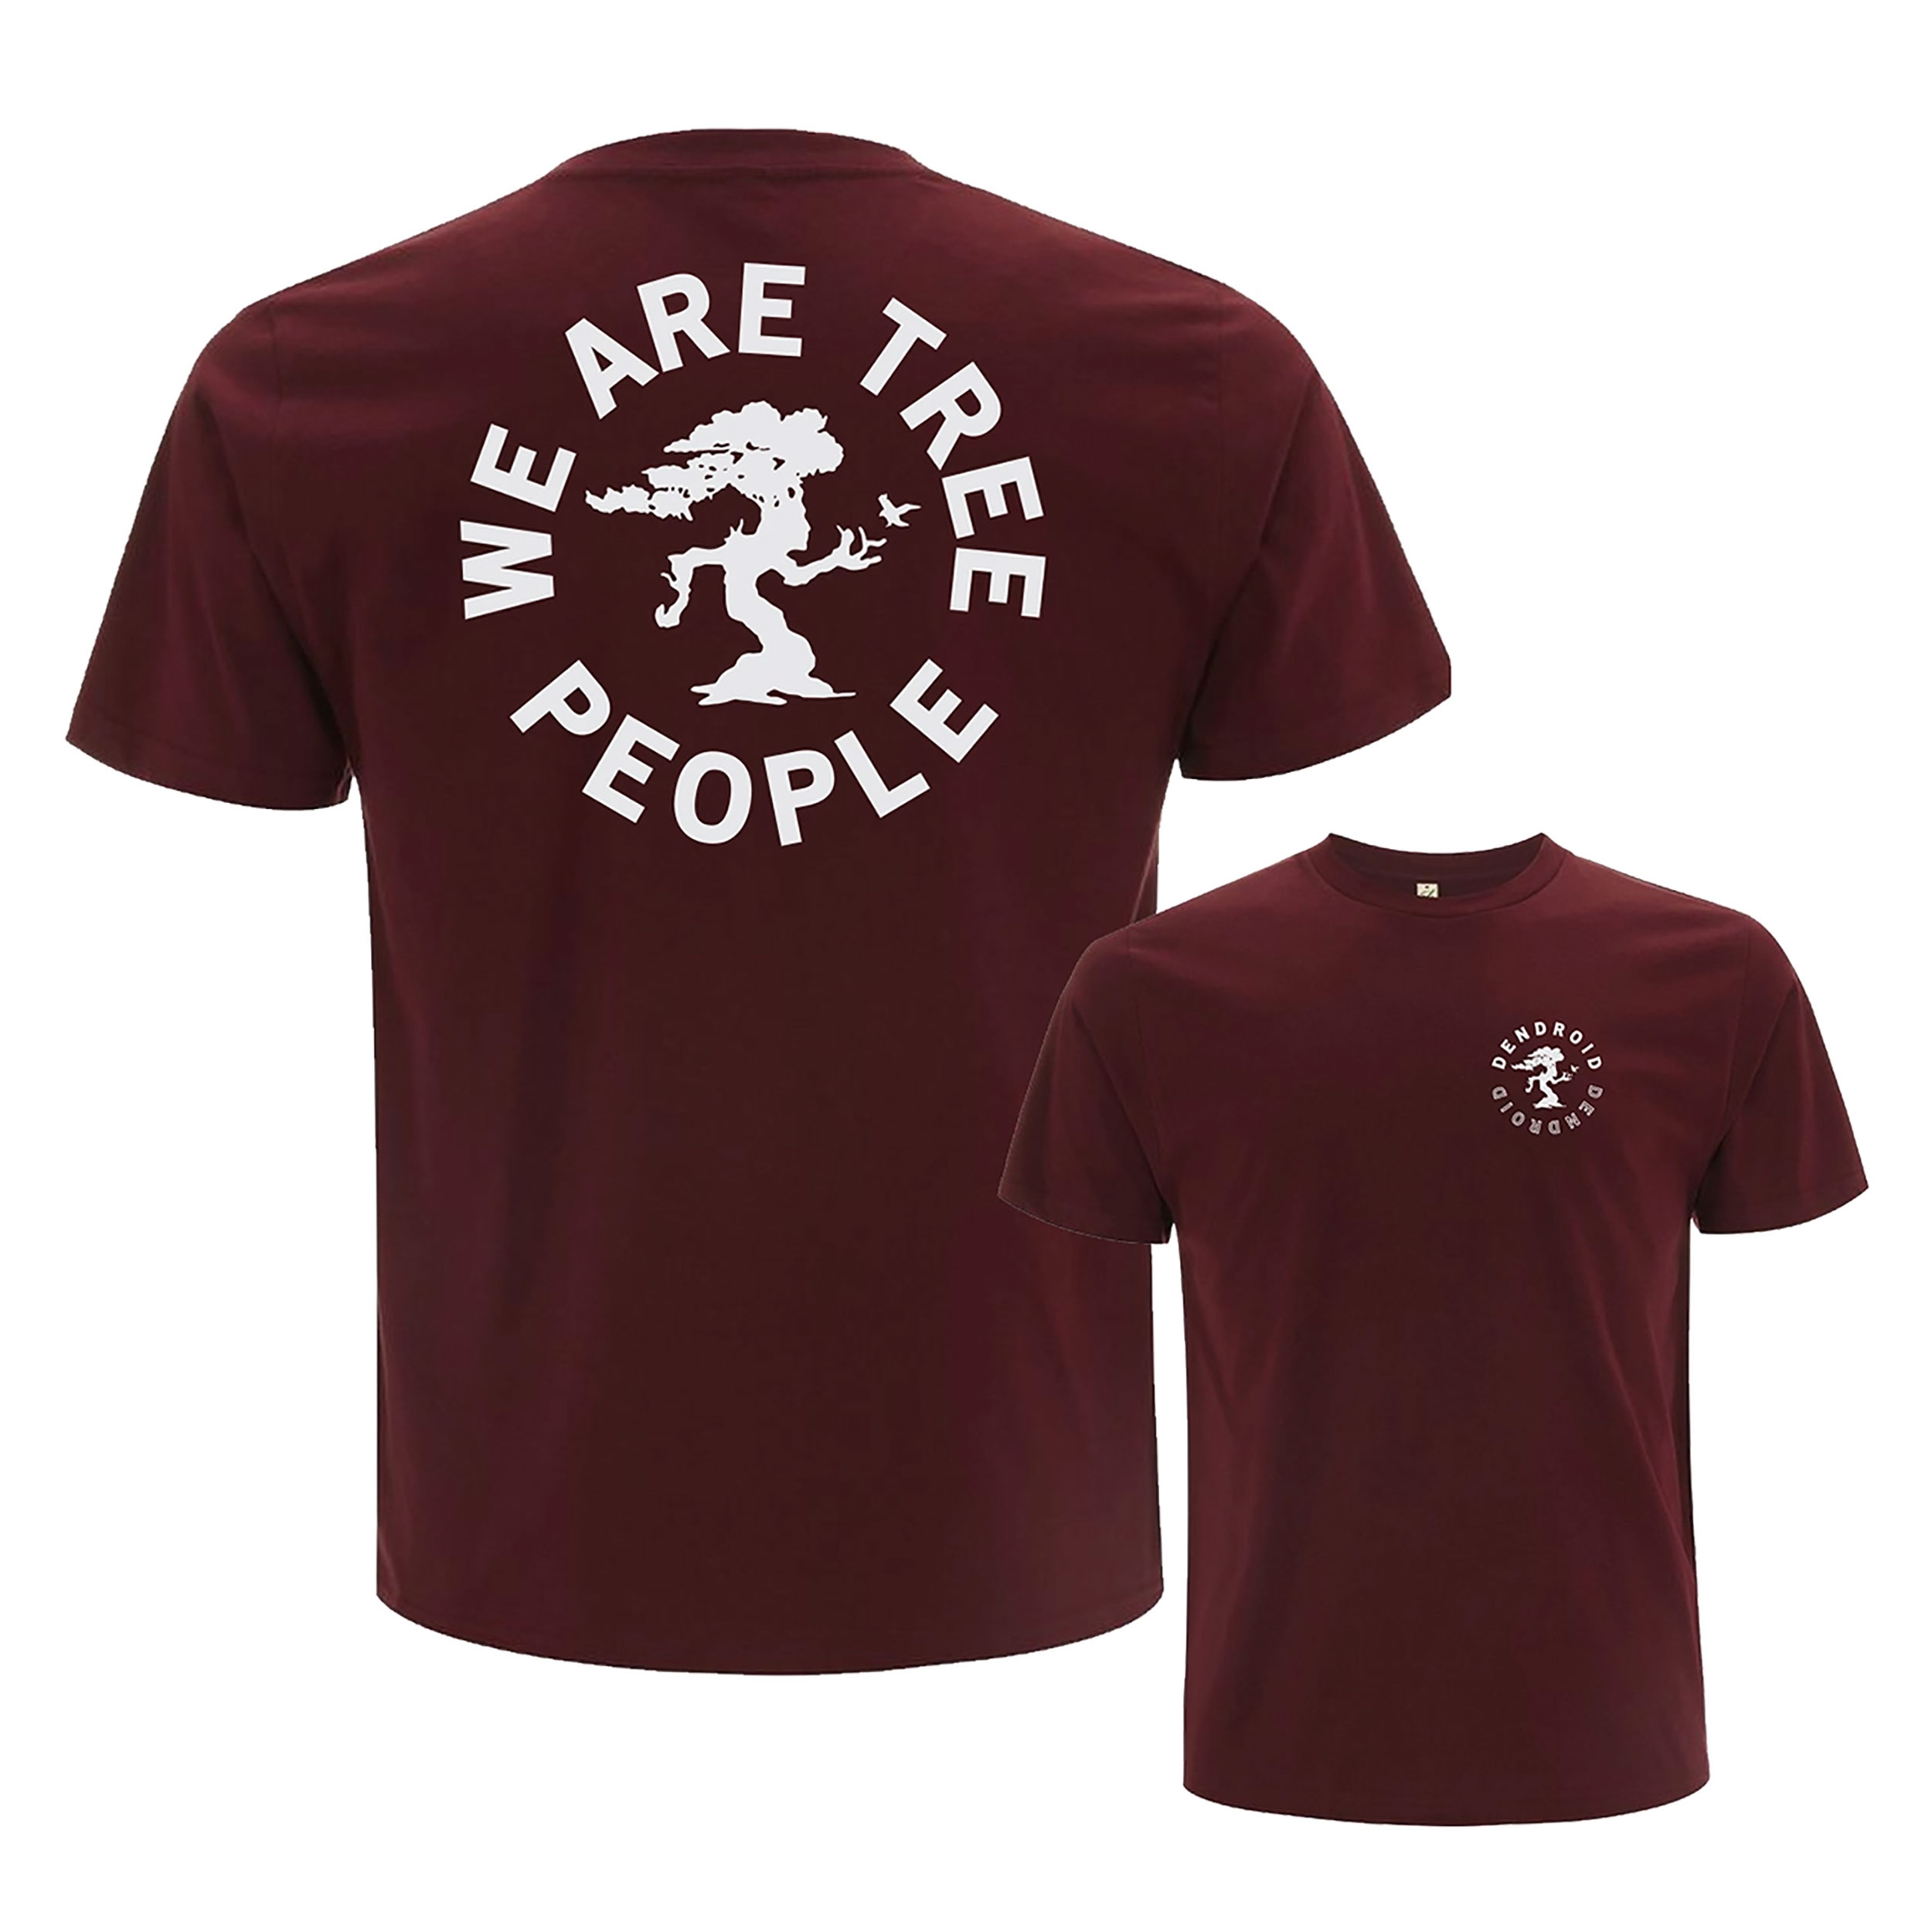 Tee-Shirt Dendroid We Are Tree People bordeaux